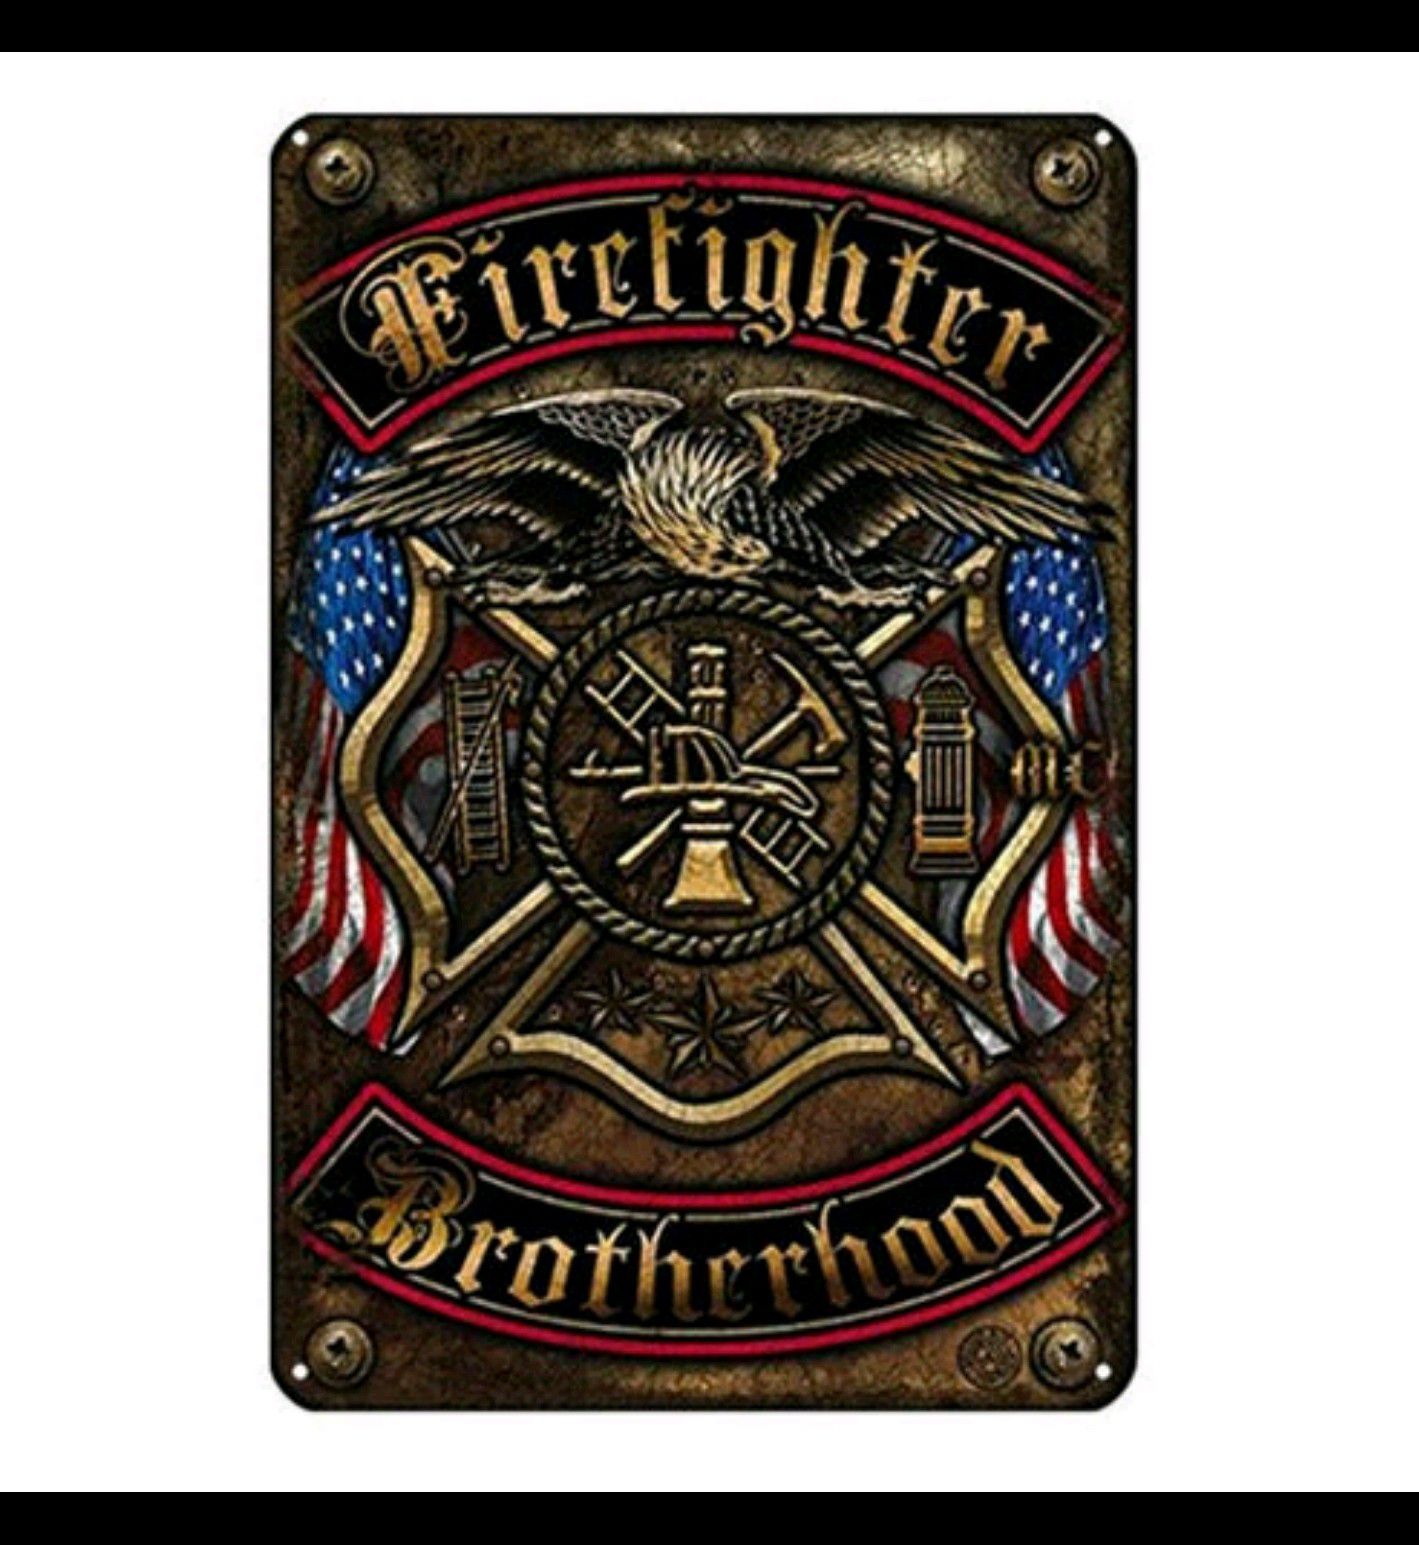 Firefighter wall tin sign